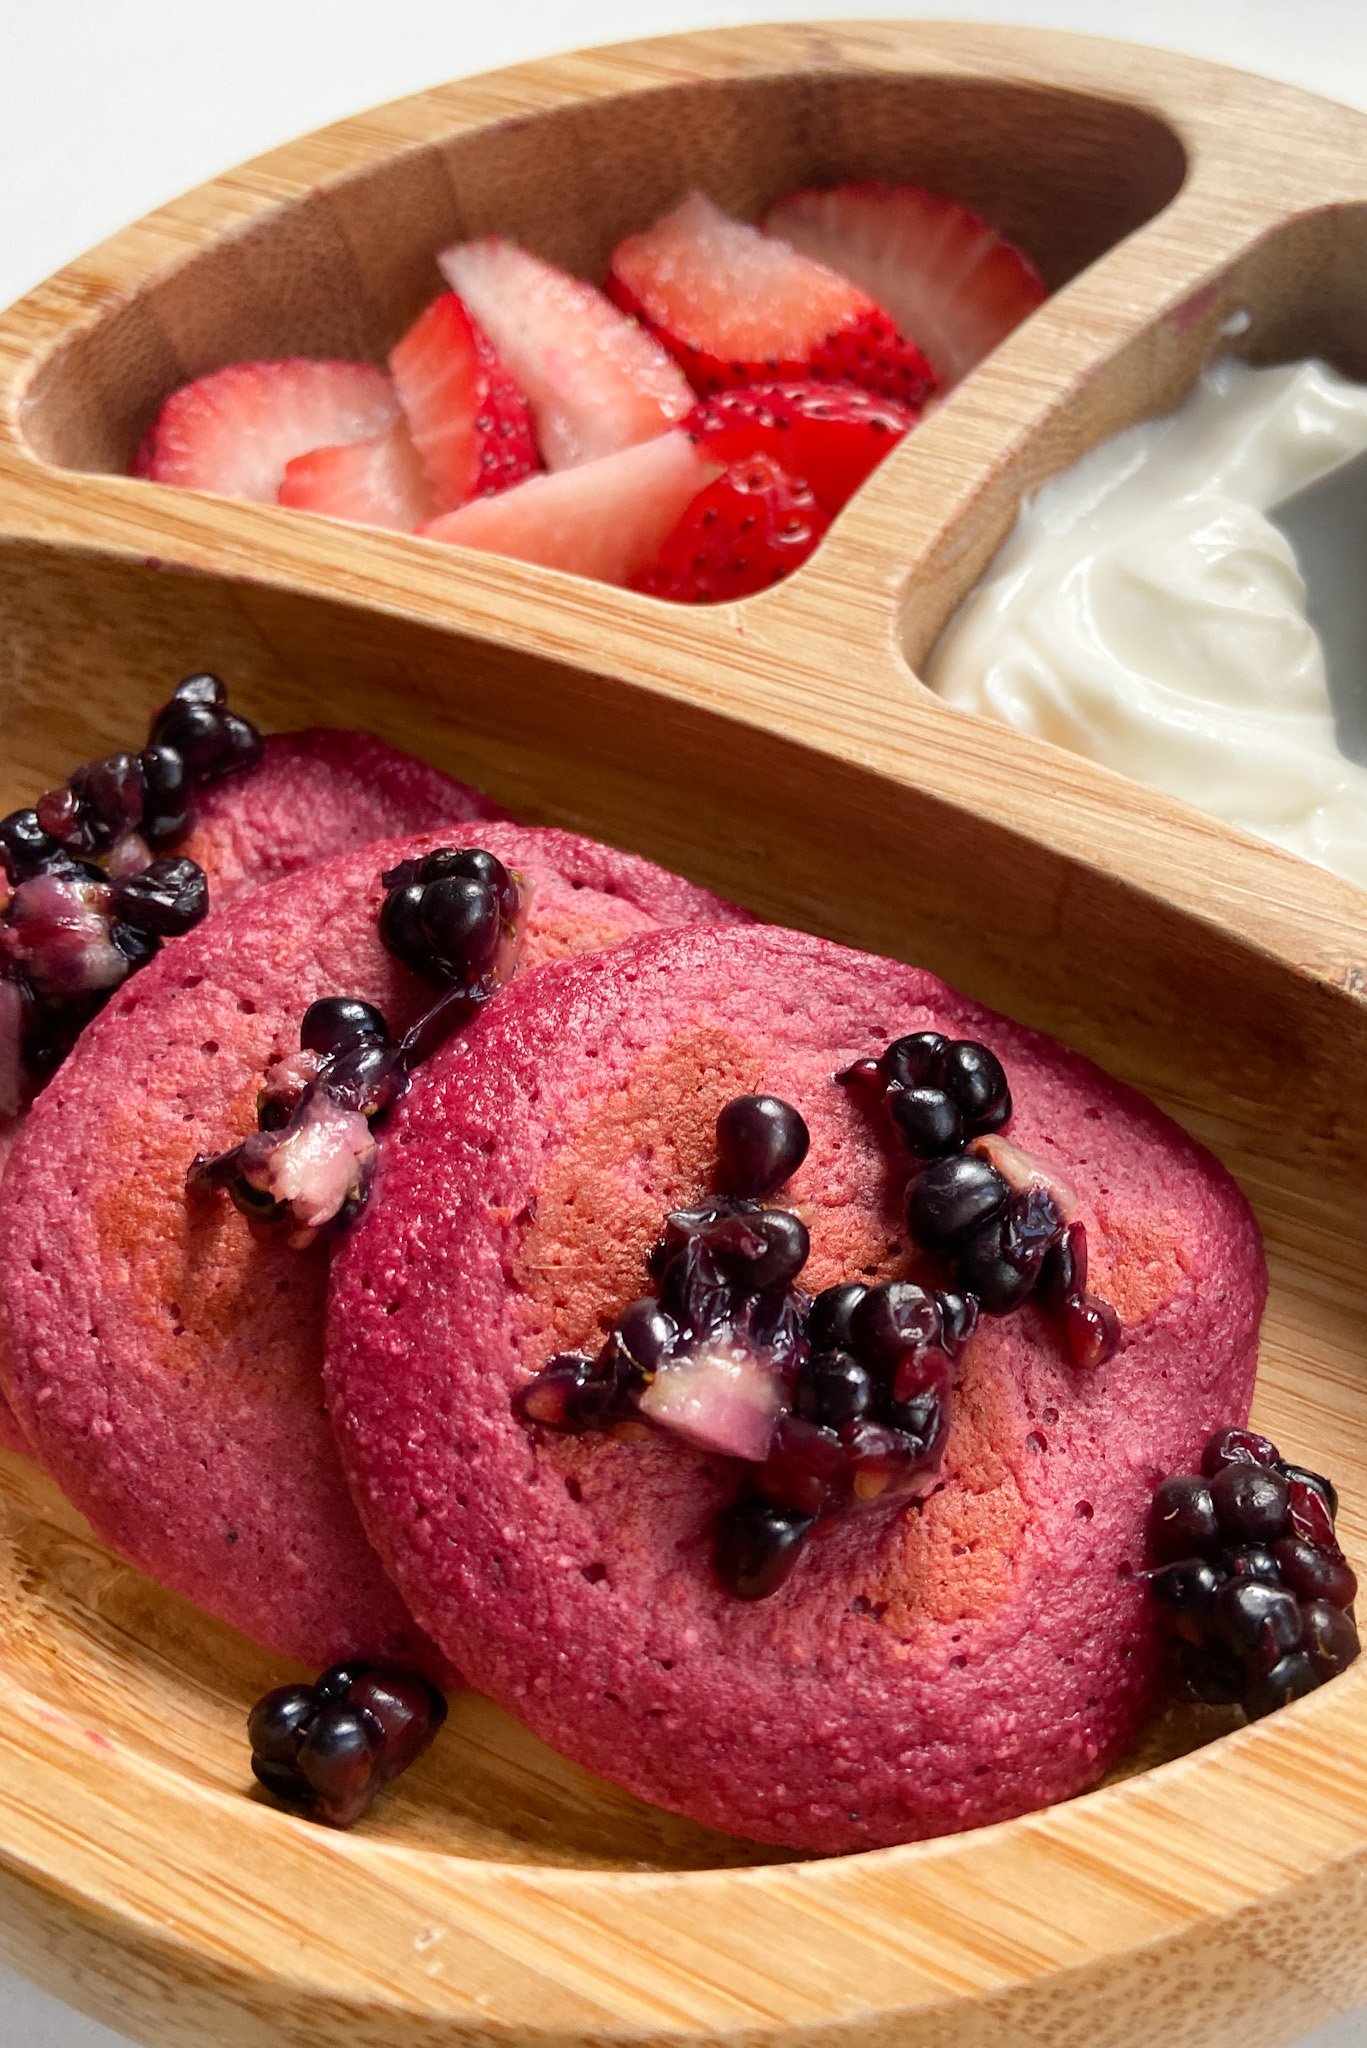 Beet banana pancakes topped with crushed blackberries